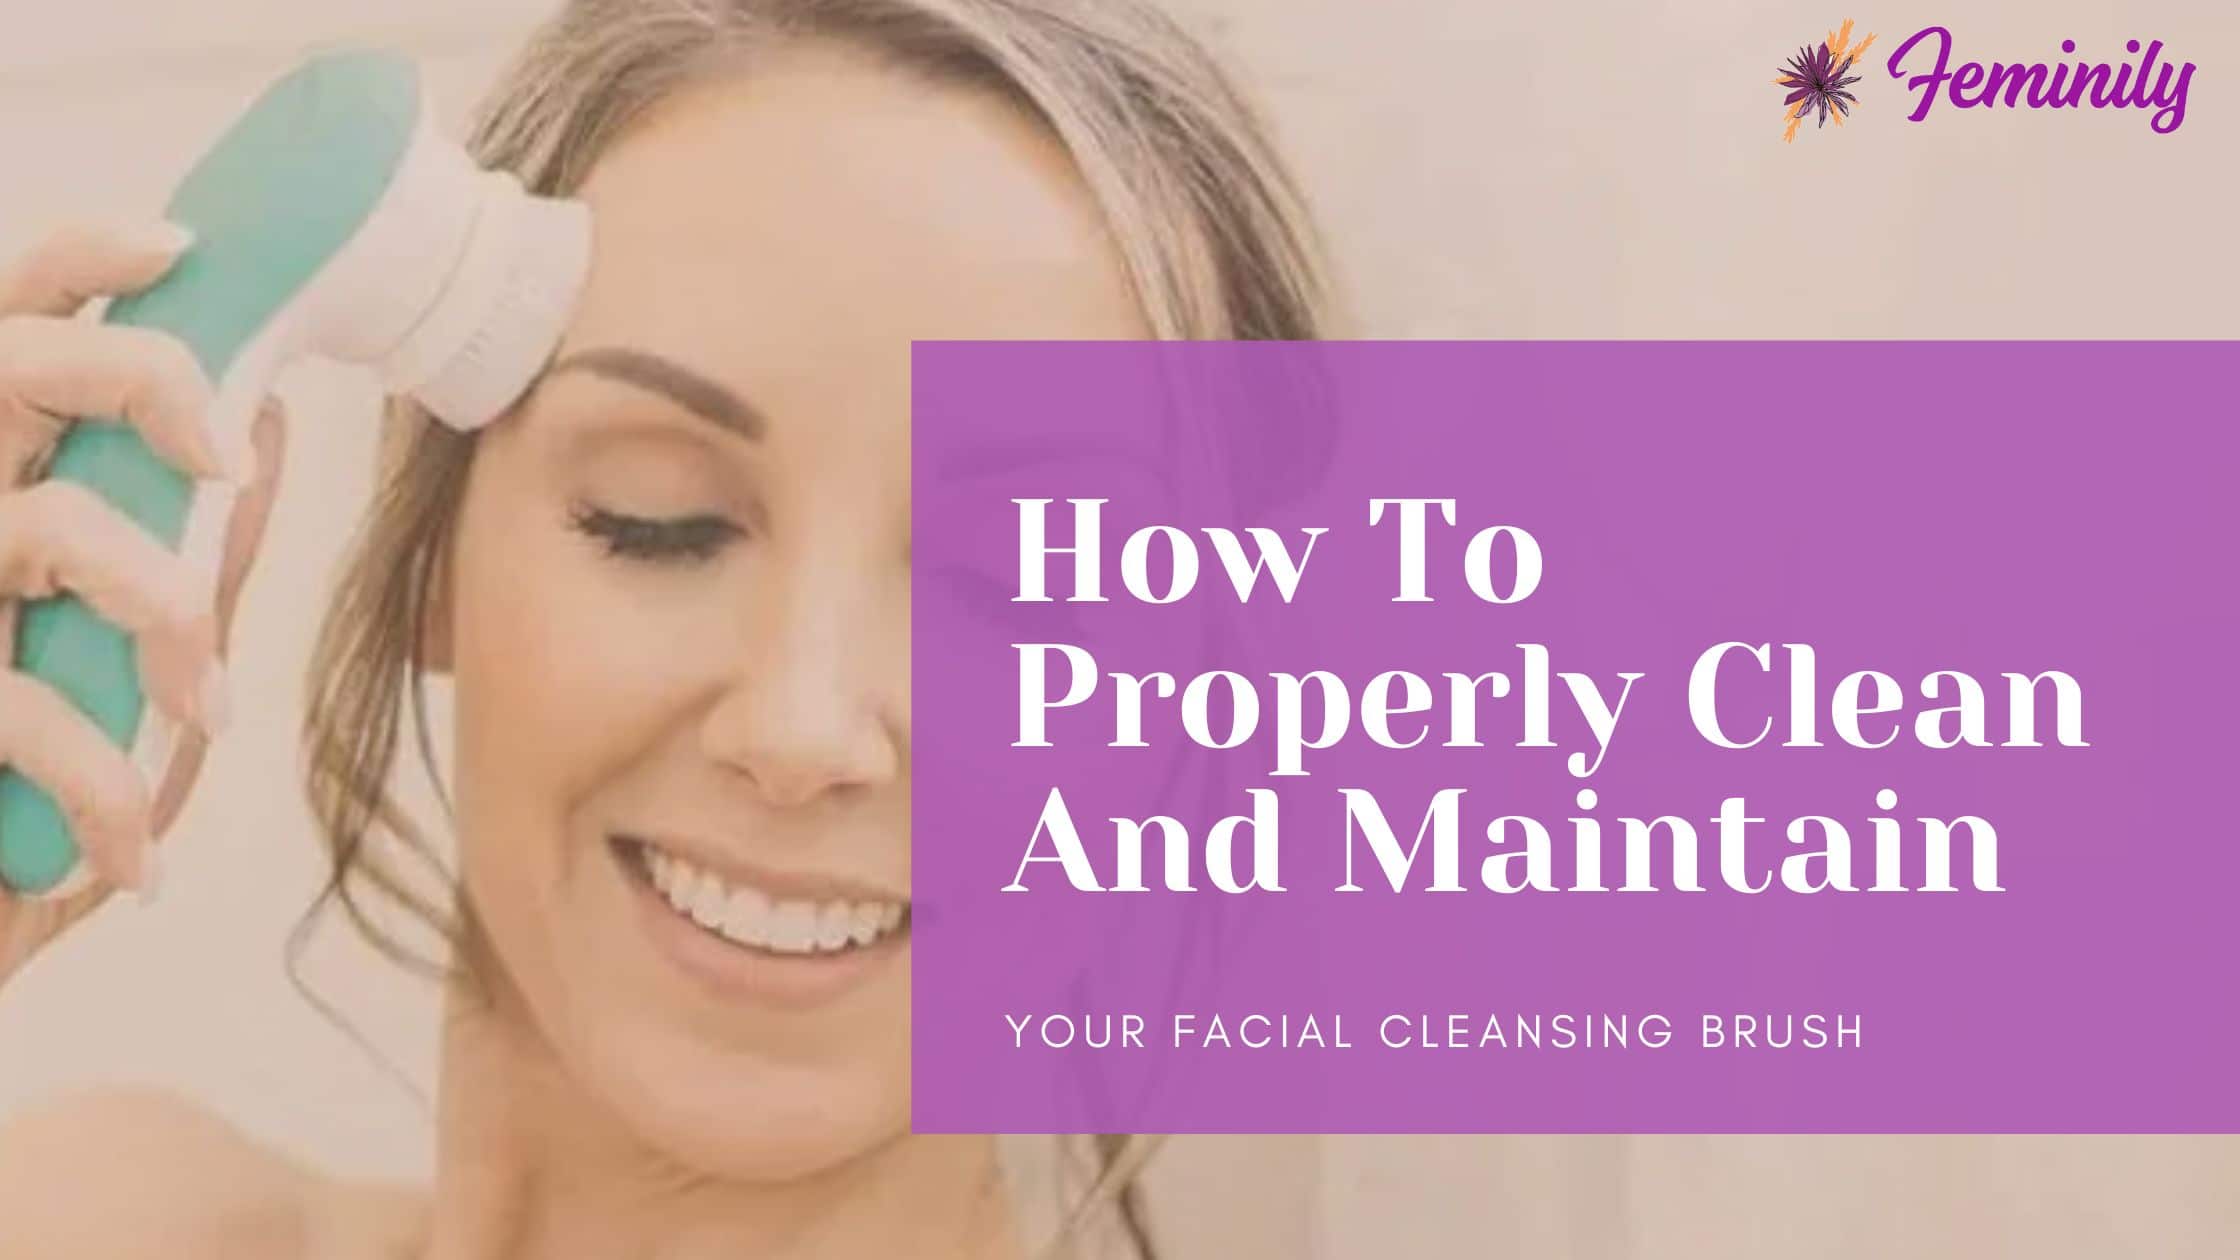 How to properly clean and maintain facial cleansing brush